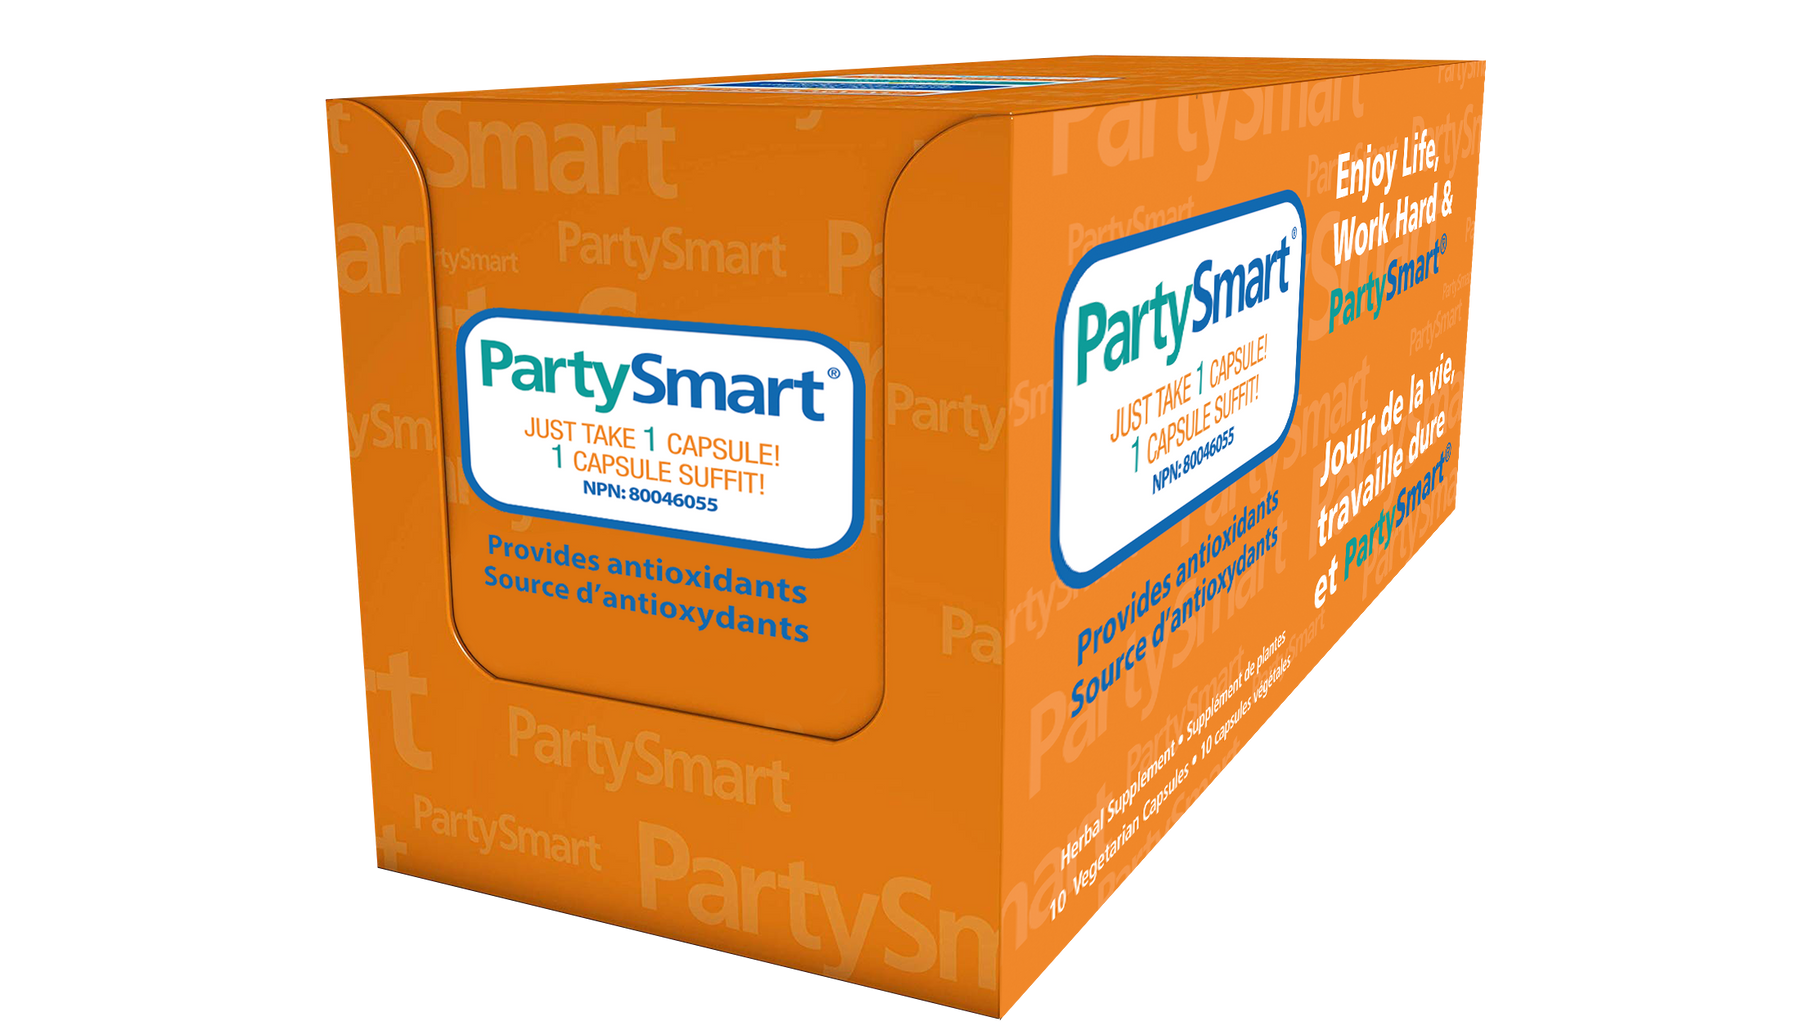 Party Smart – Signs of Hope